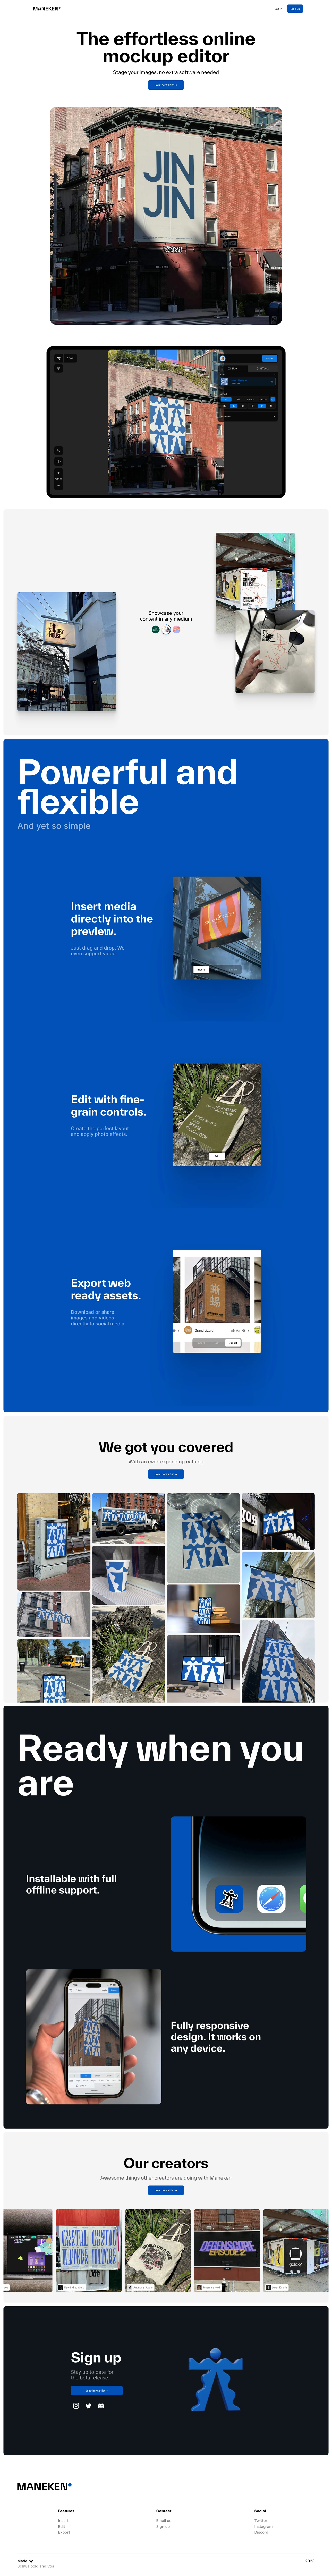 Maneken Landing Page Example: The effortless online mockup editor. Stage your images, no extra software needed.